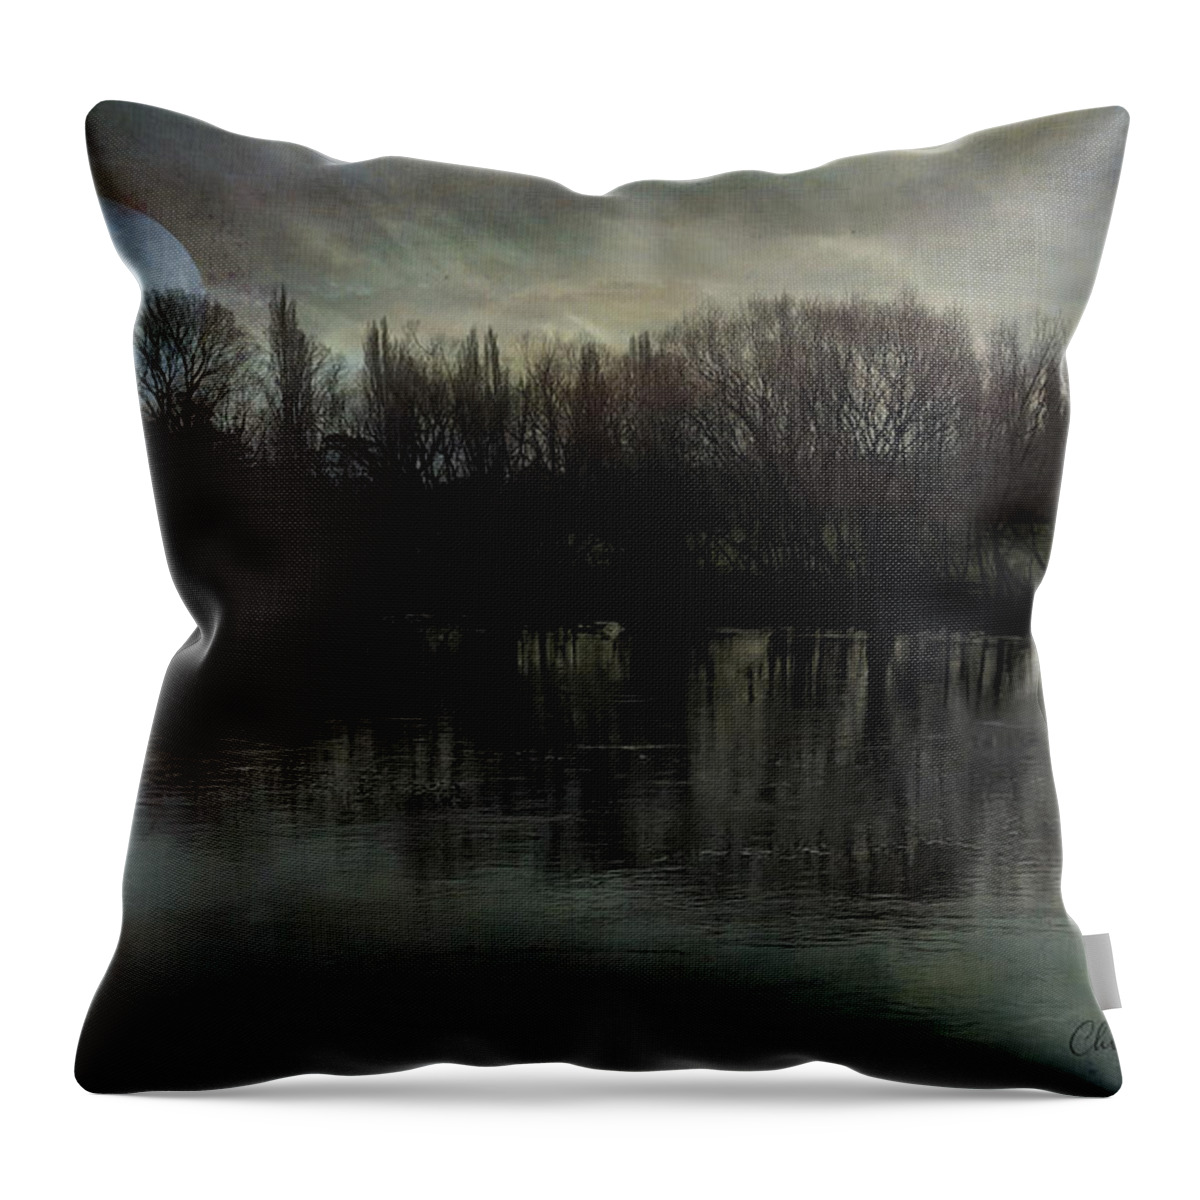 Monotone Throw Pillow featuring the photograph Blue Moon River by Chris Armytage